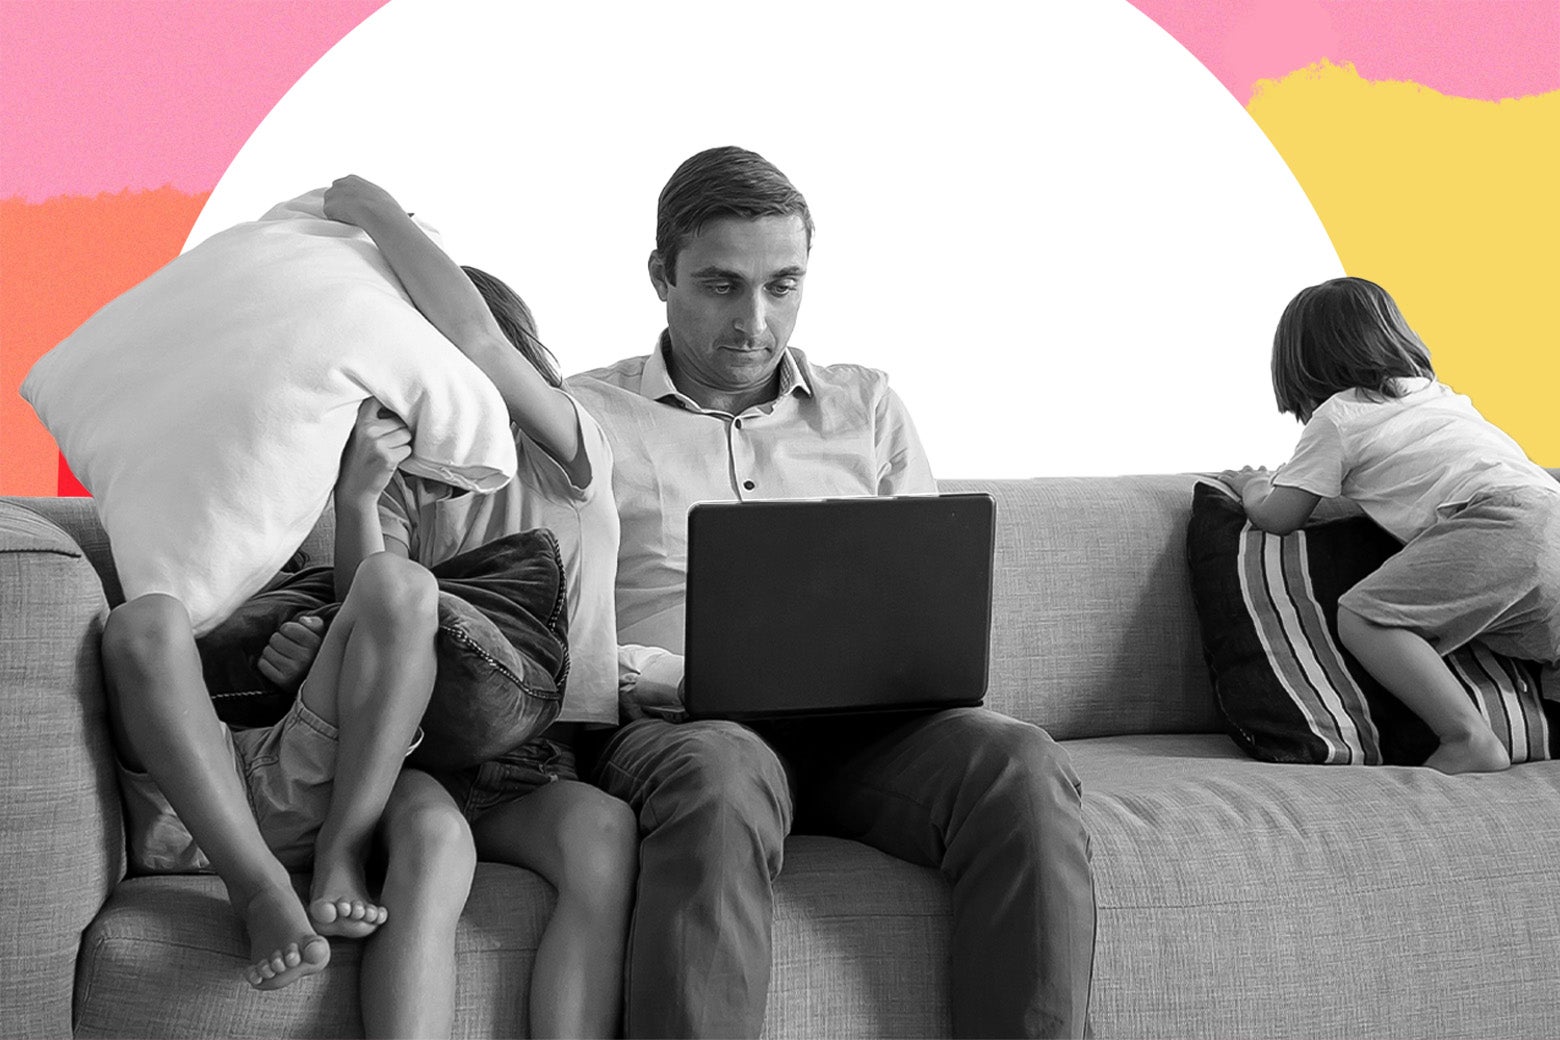 A man works on a laptop on the couch surrounded by kids.